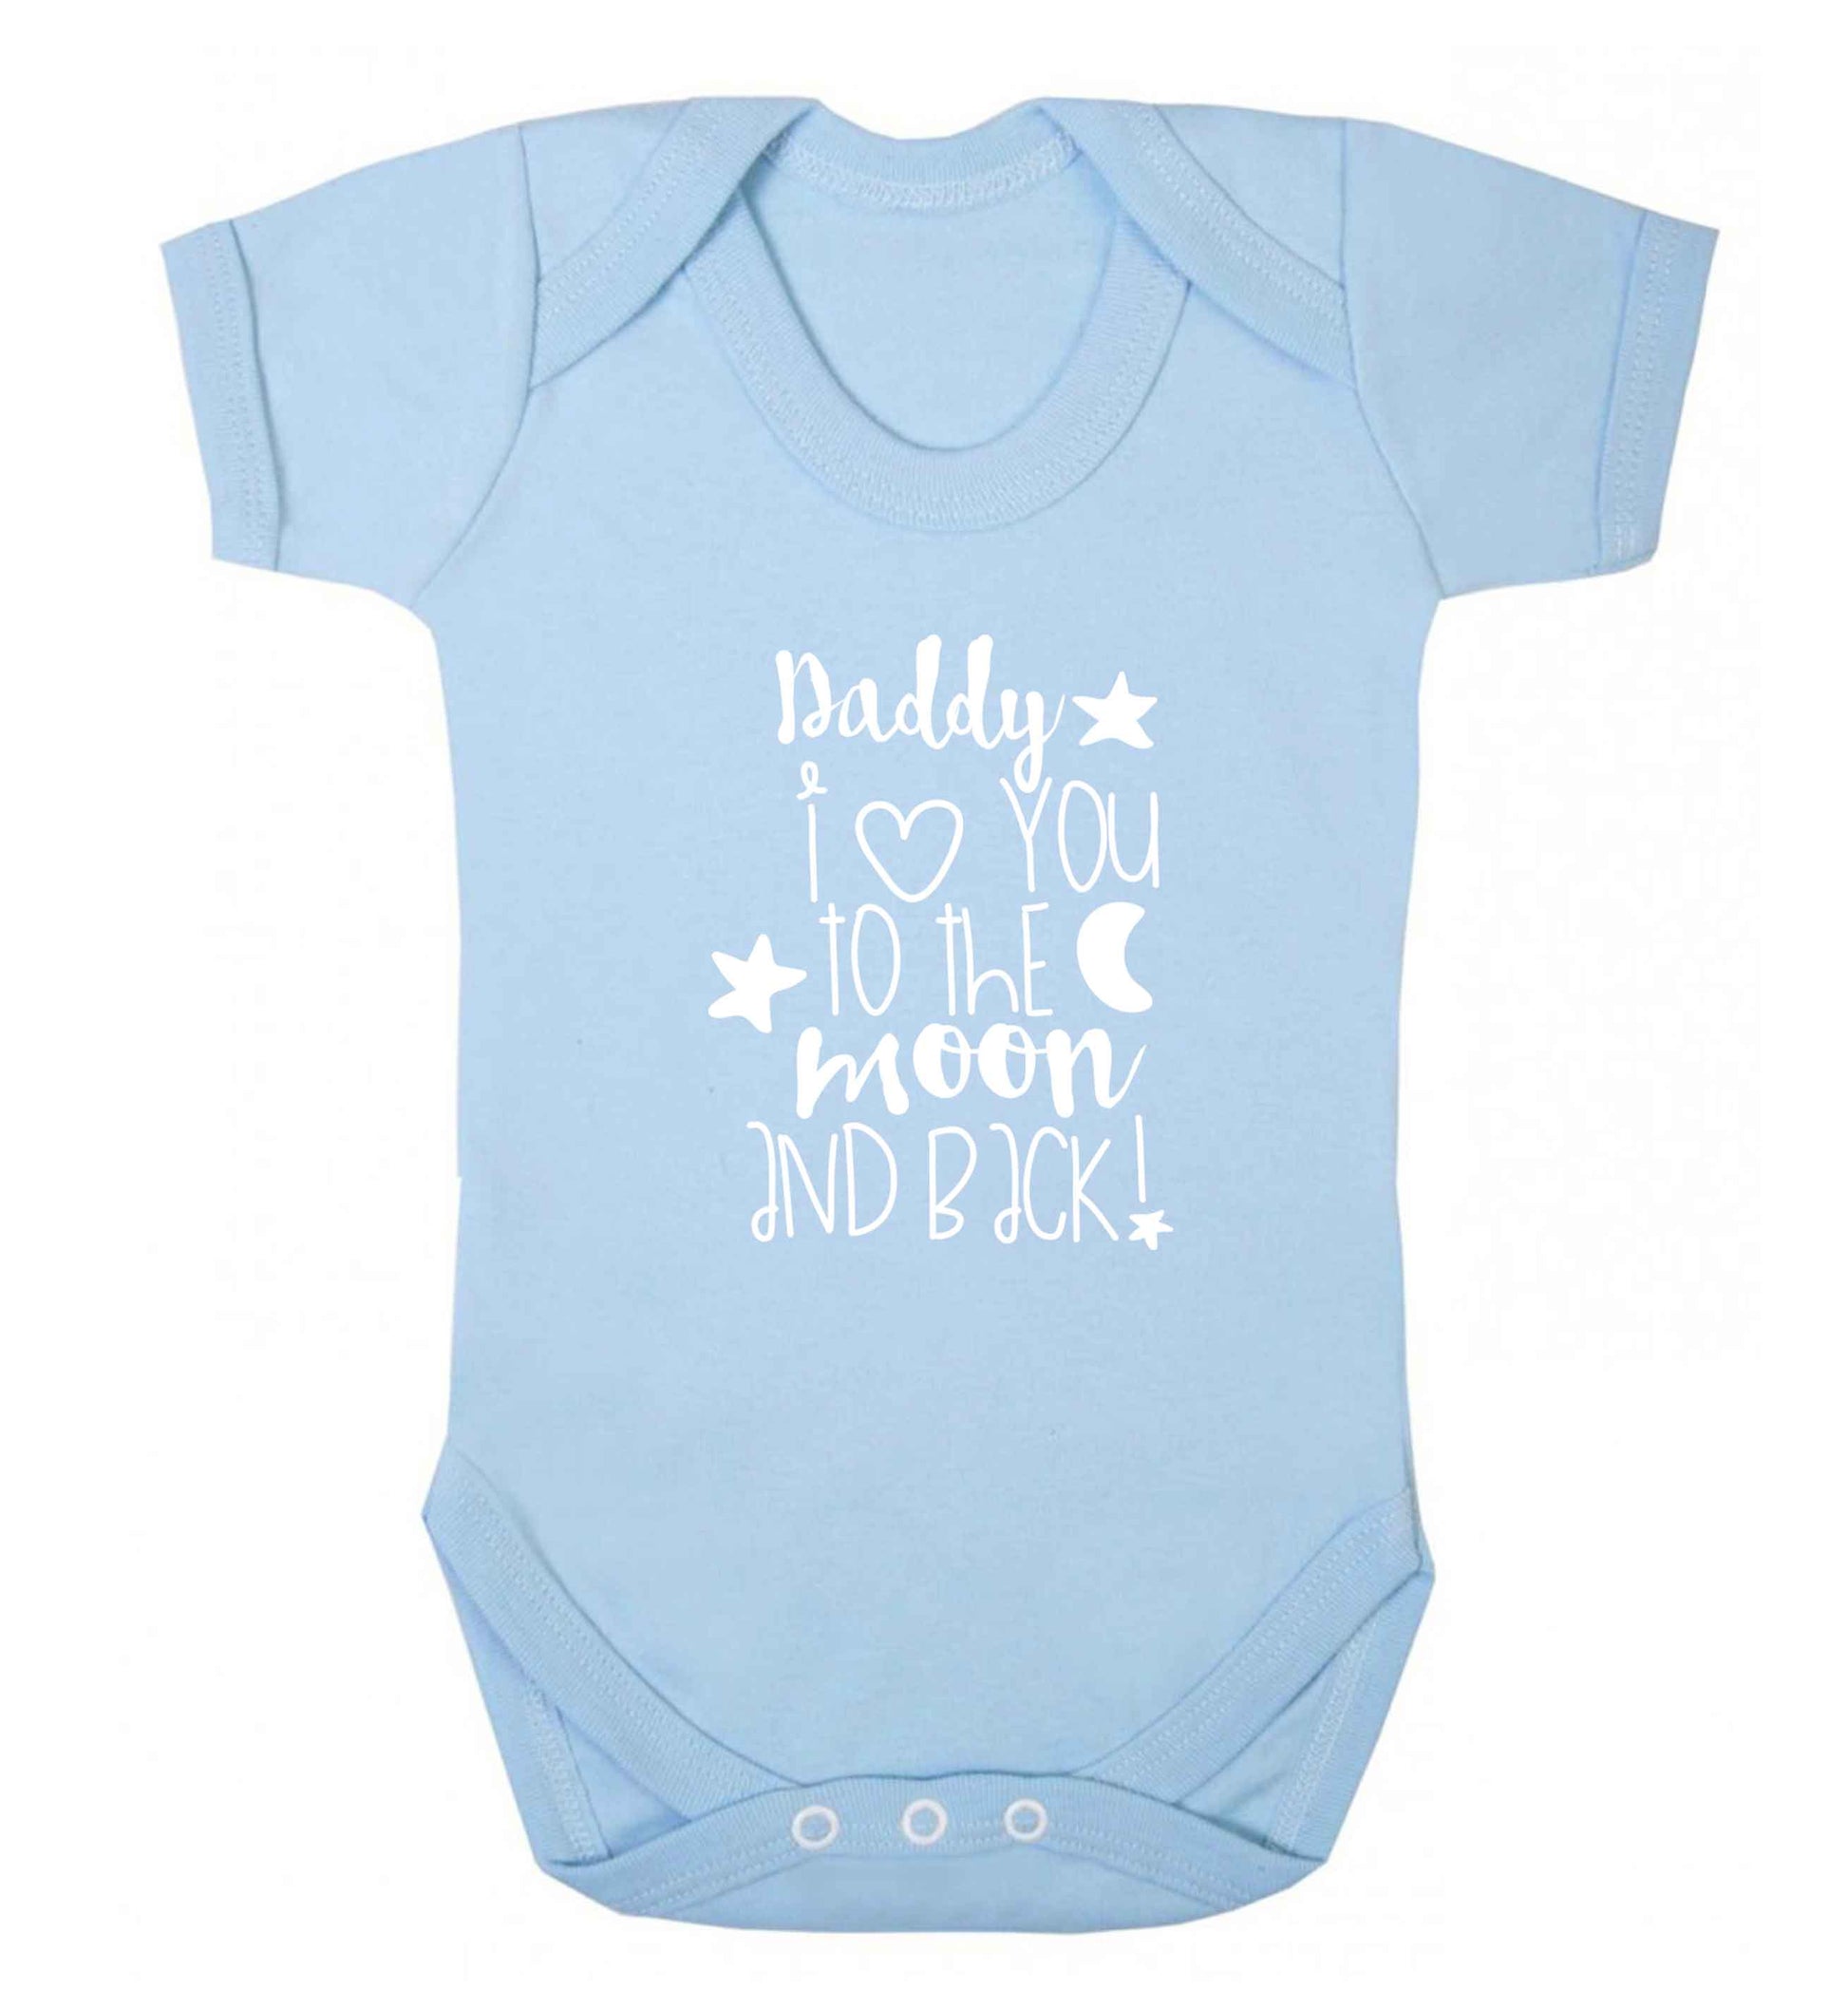 Daddy I love you to the moon and back baby vest pale blue 18-24 months